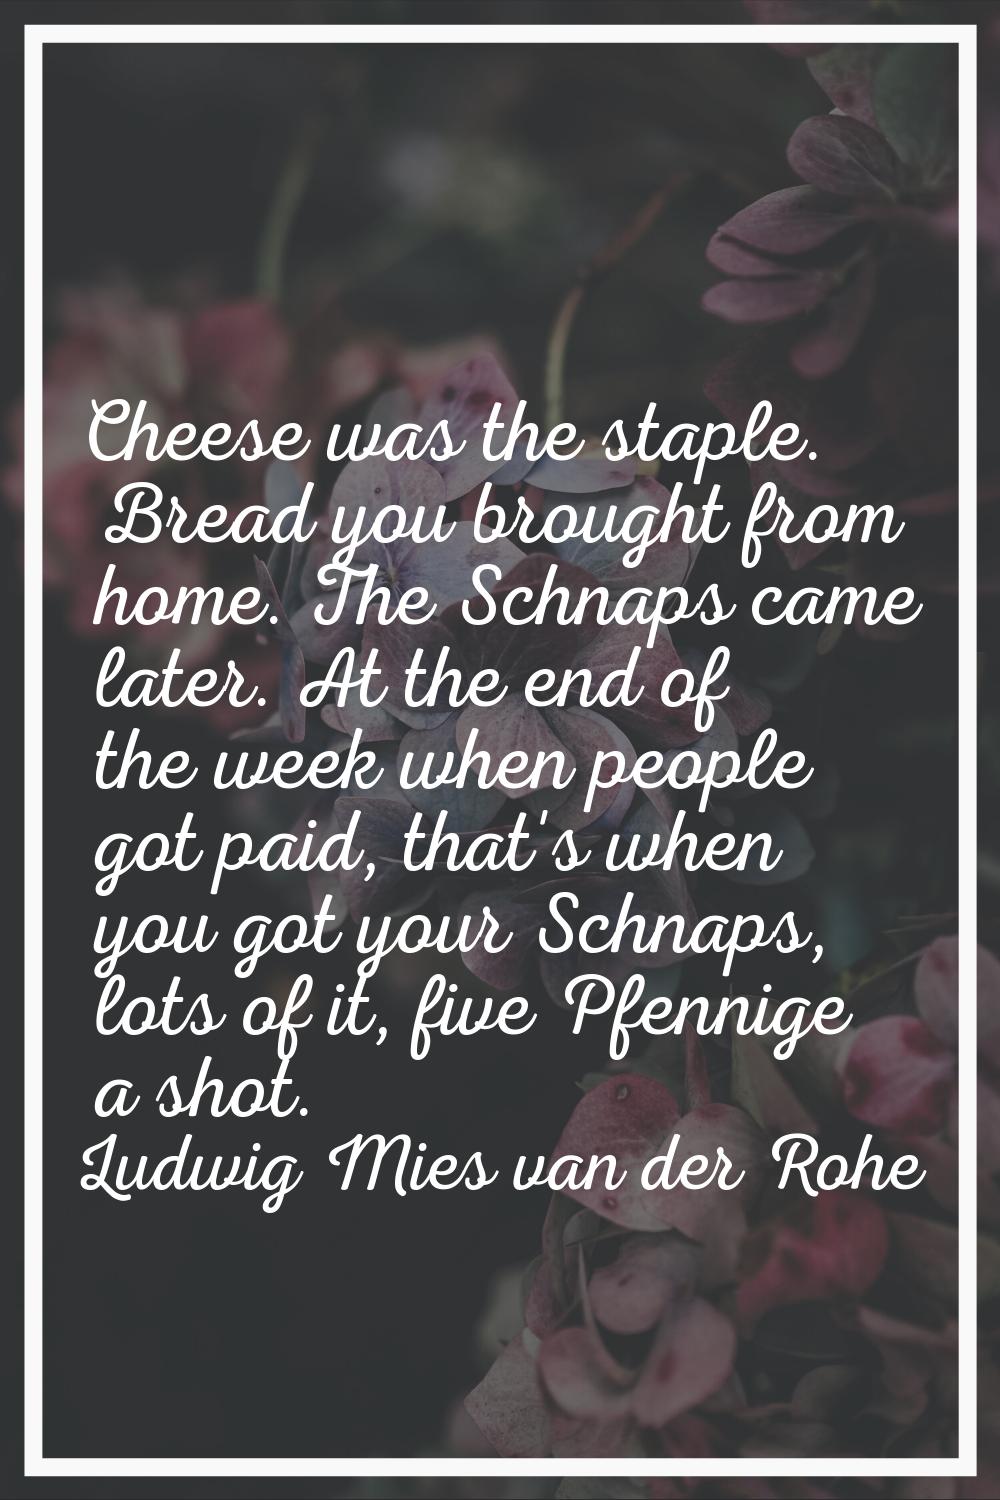 Cheese was the staple. Bread you brought from home. The Schnaps came later. At the end of the week 